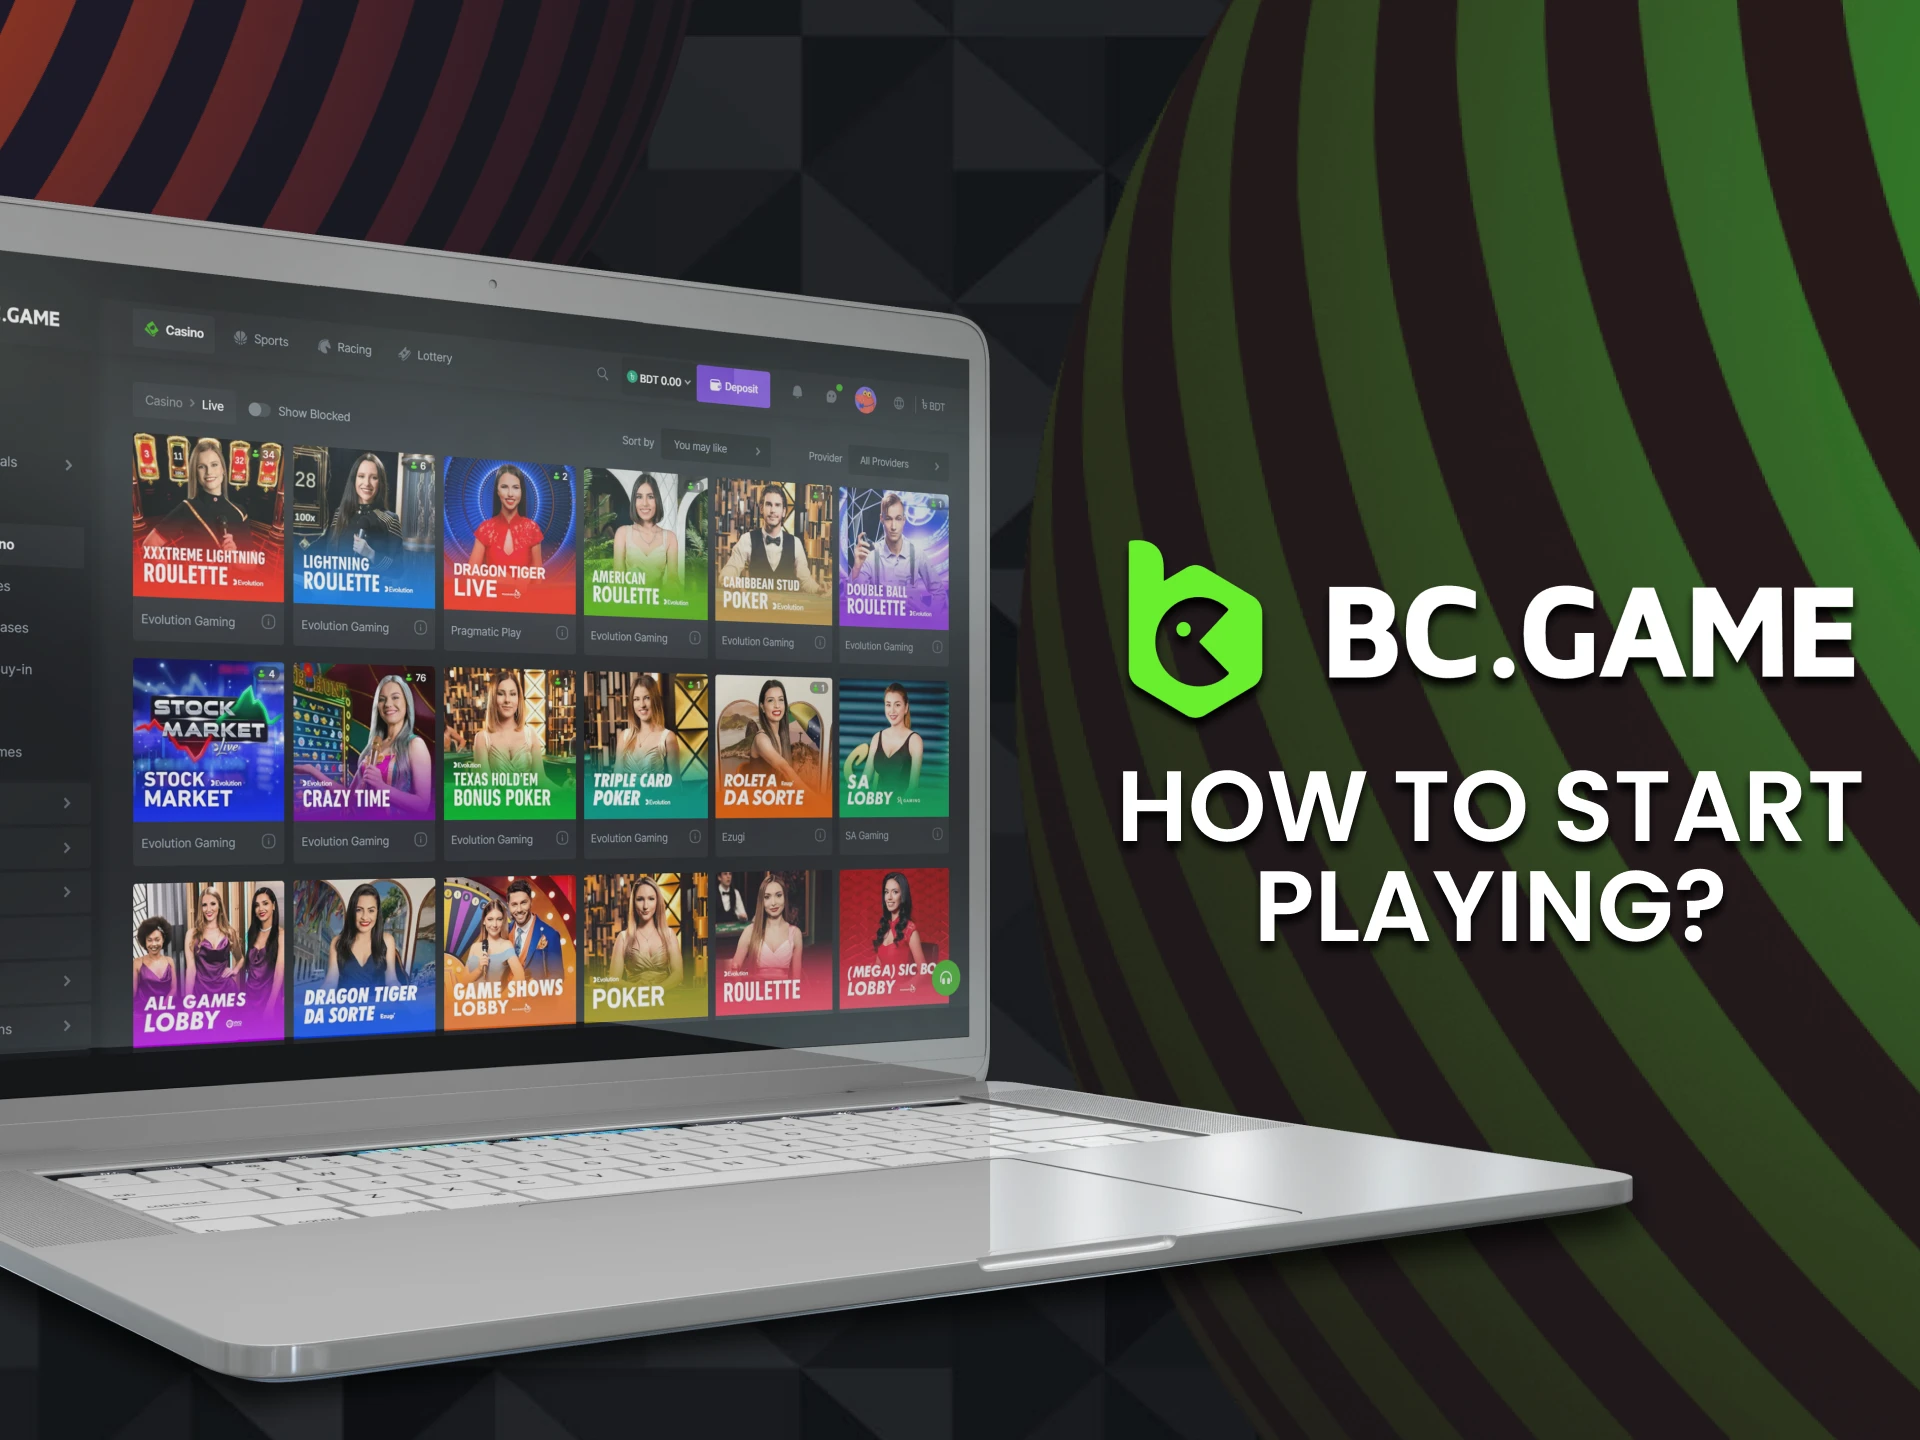 Select the BC Game live casino section if you want to play with real dealers.